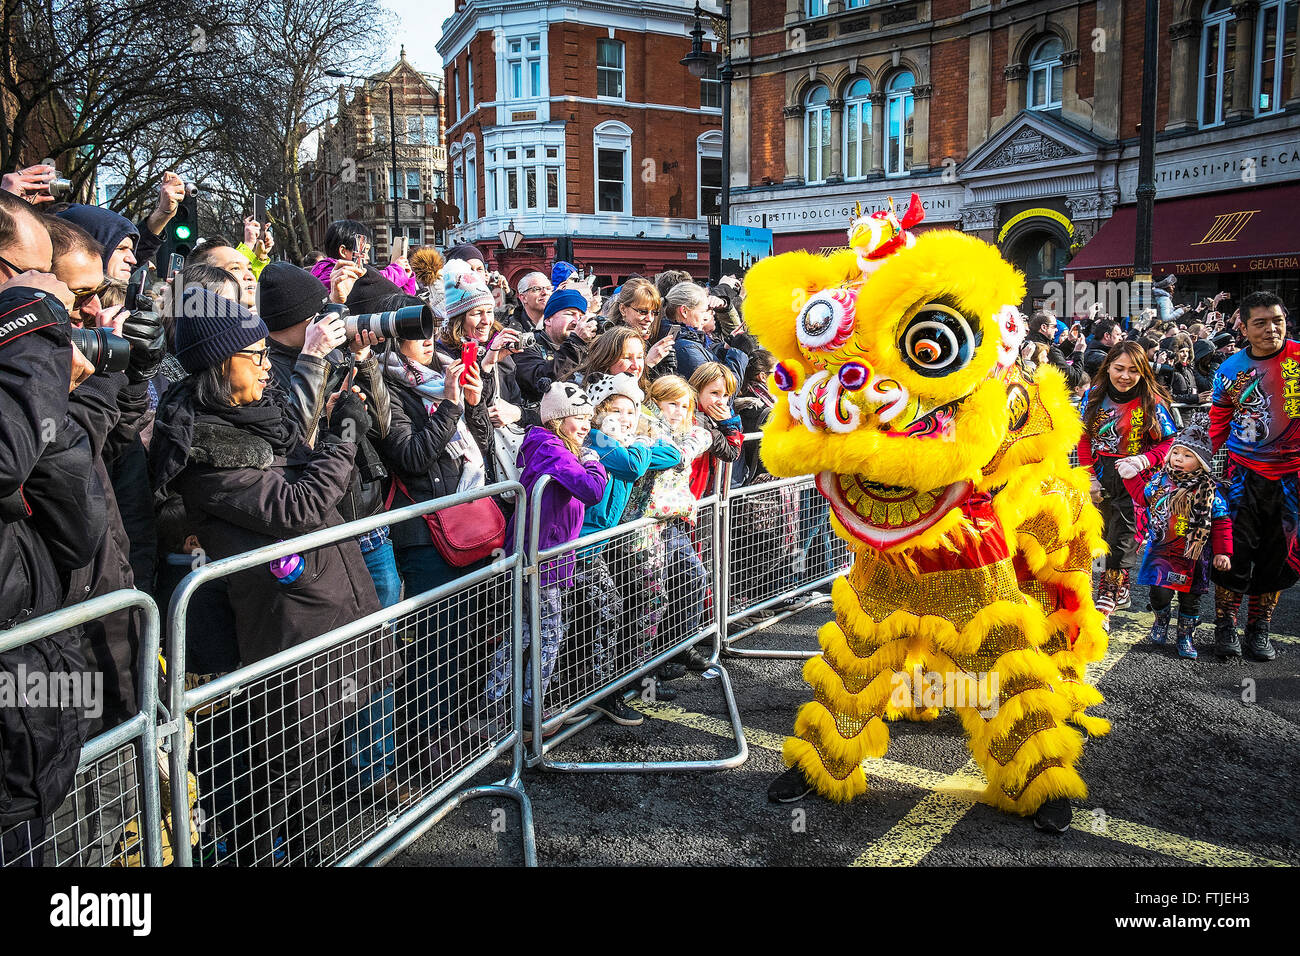 In London thousands of people celebrating the Chinese New Year 2016 - The Year of the Monkey. Stock Photo